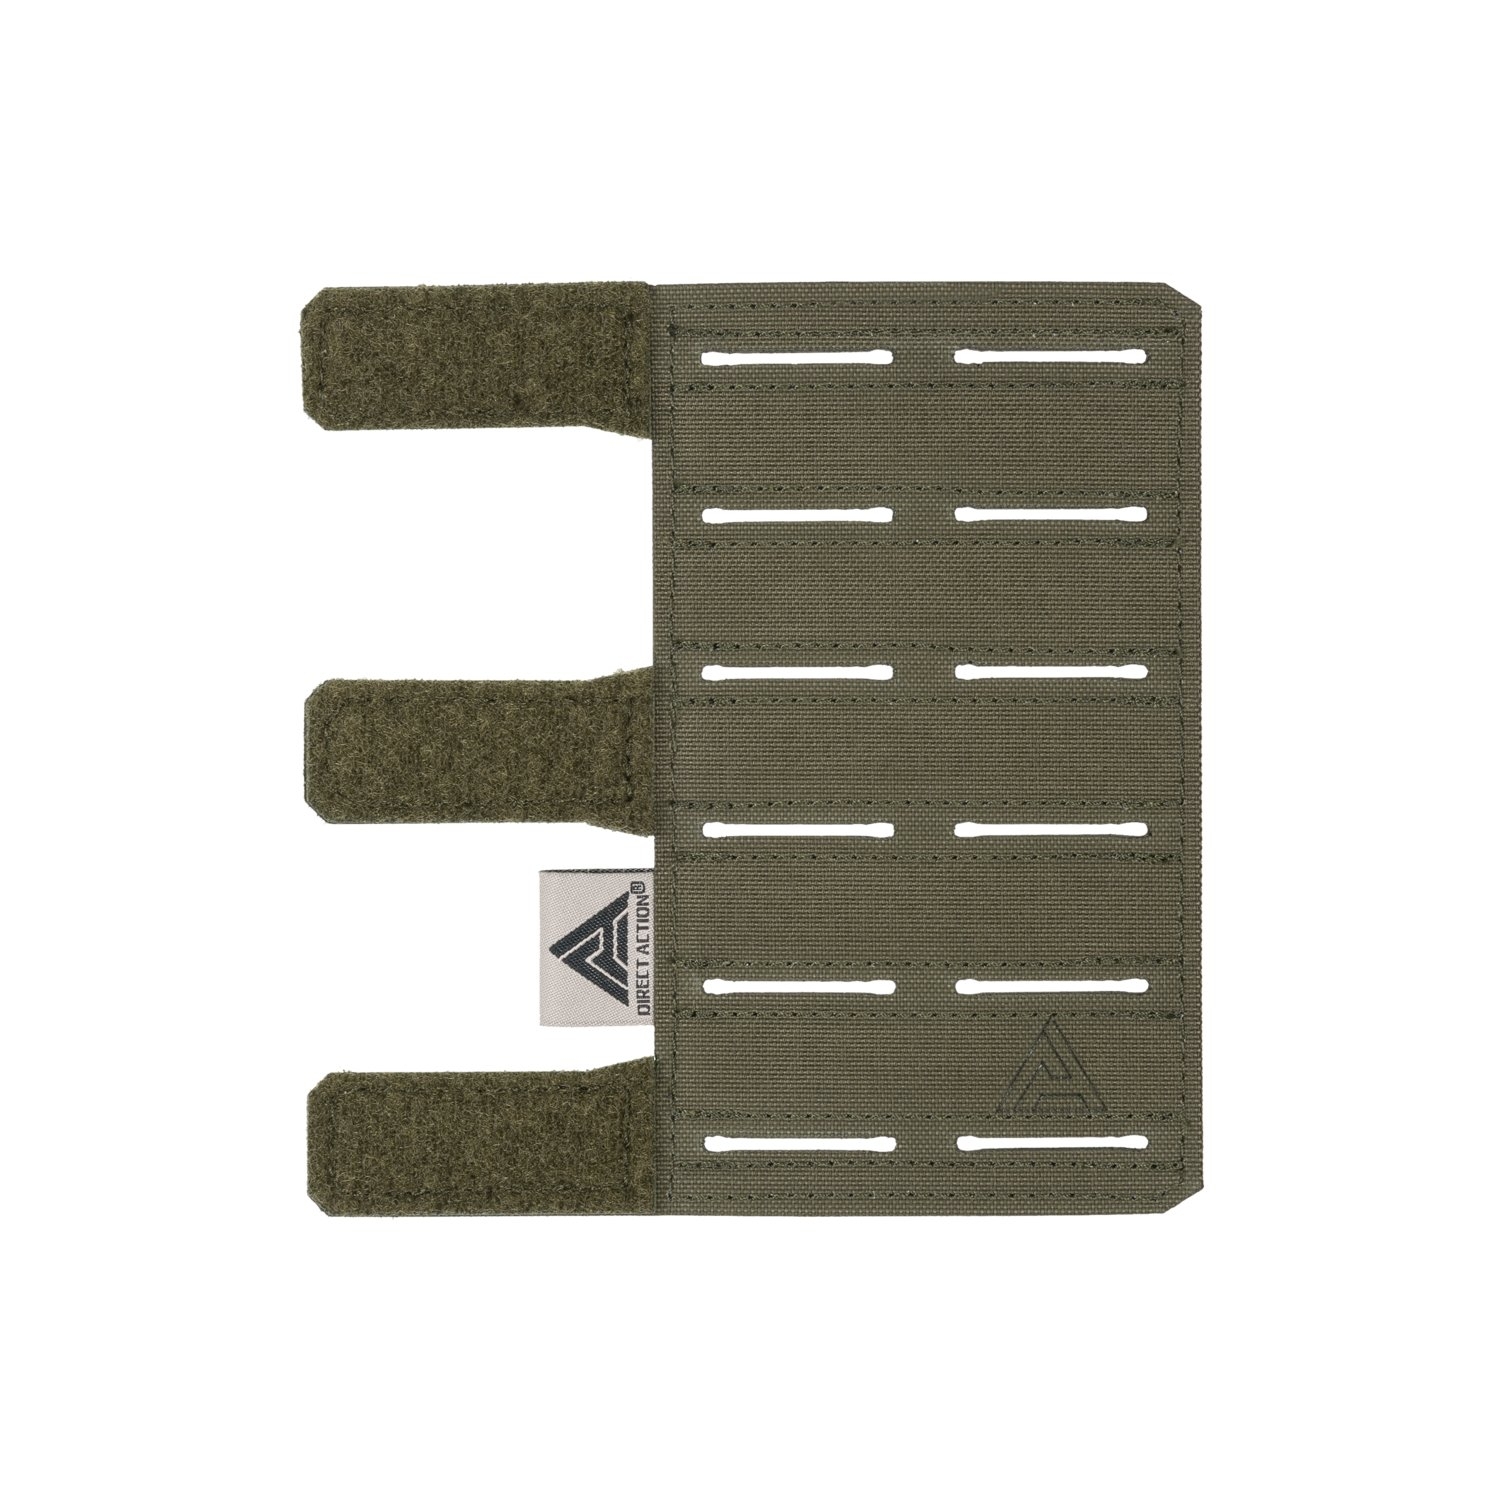 Image of Panel SPITFIRE DIRECT ACTION MOLLE WING - Cordura - Ranger Green - One Size (PL-SPMW-CD5-RGR)